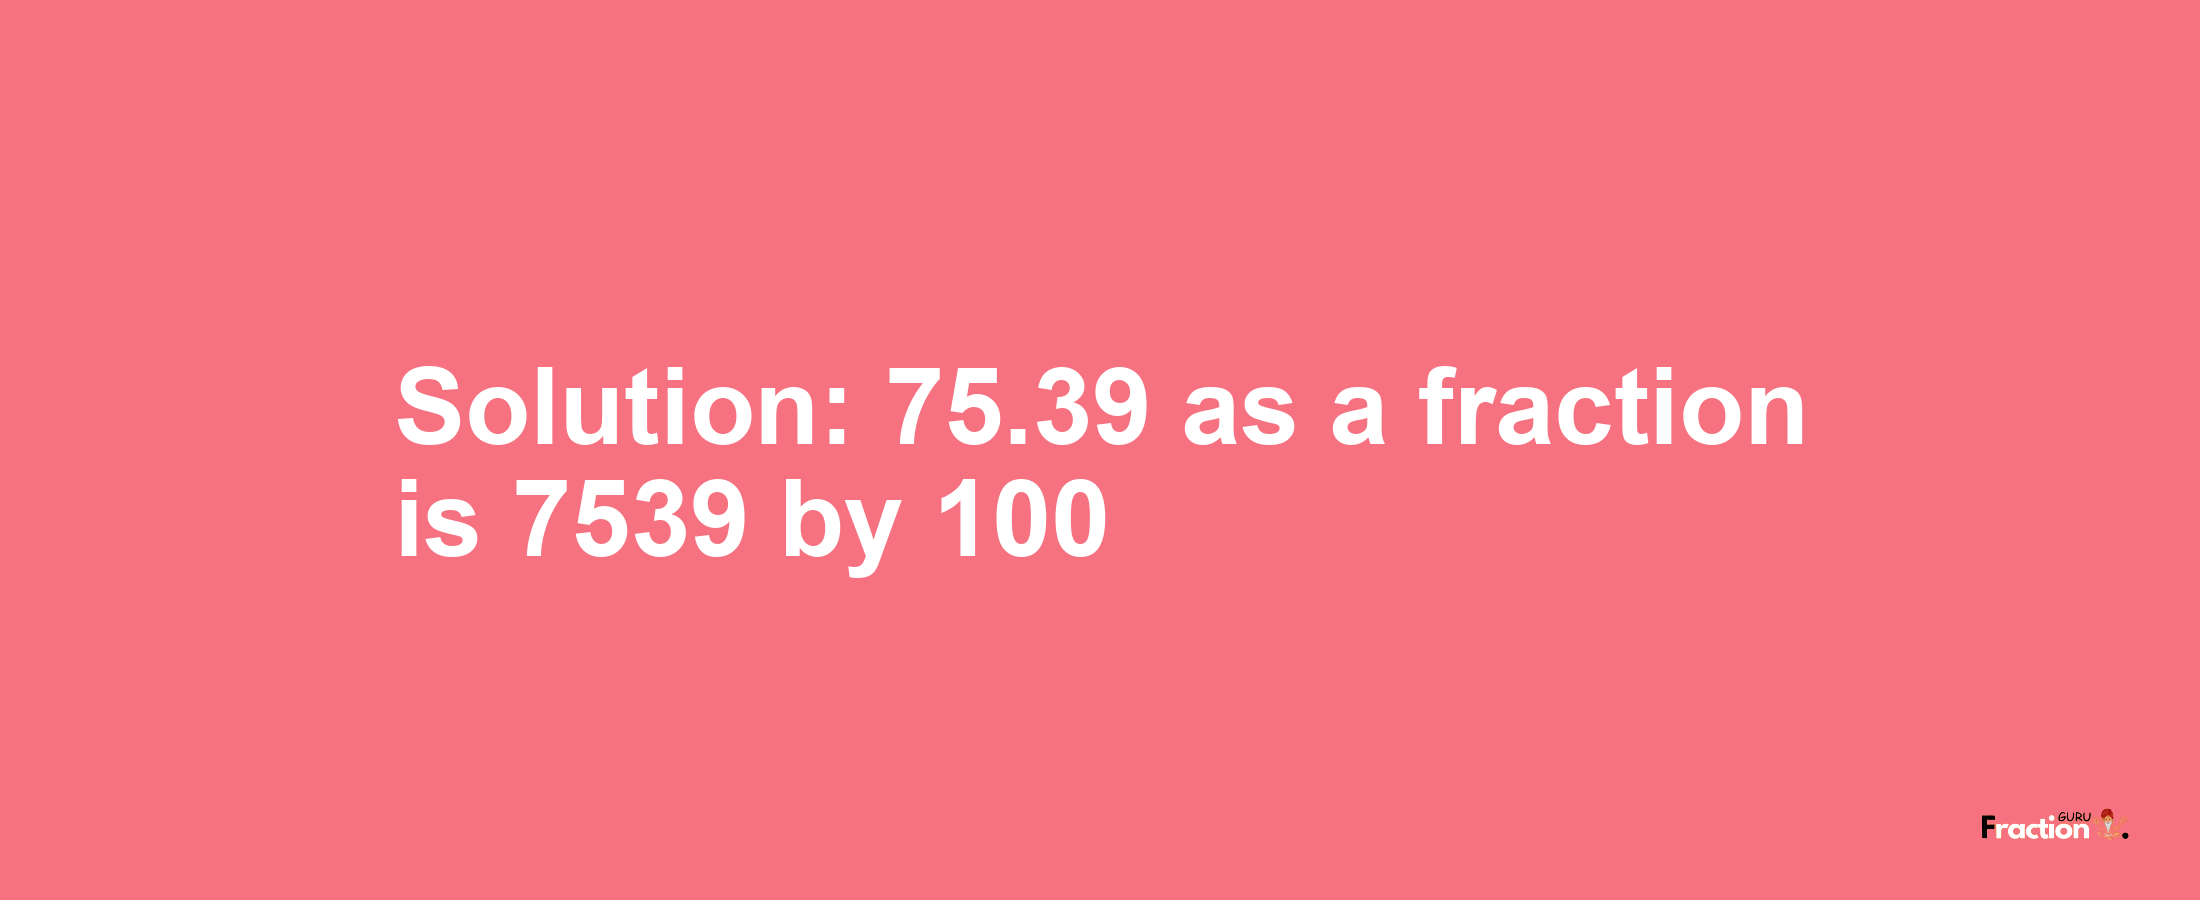 Solution:75.39 as a fraction is 7539/100